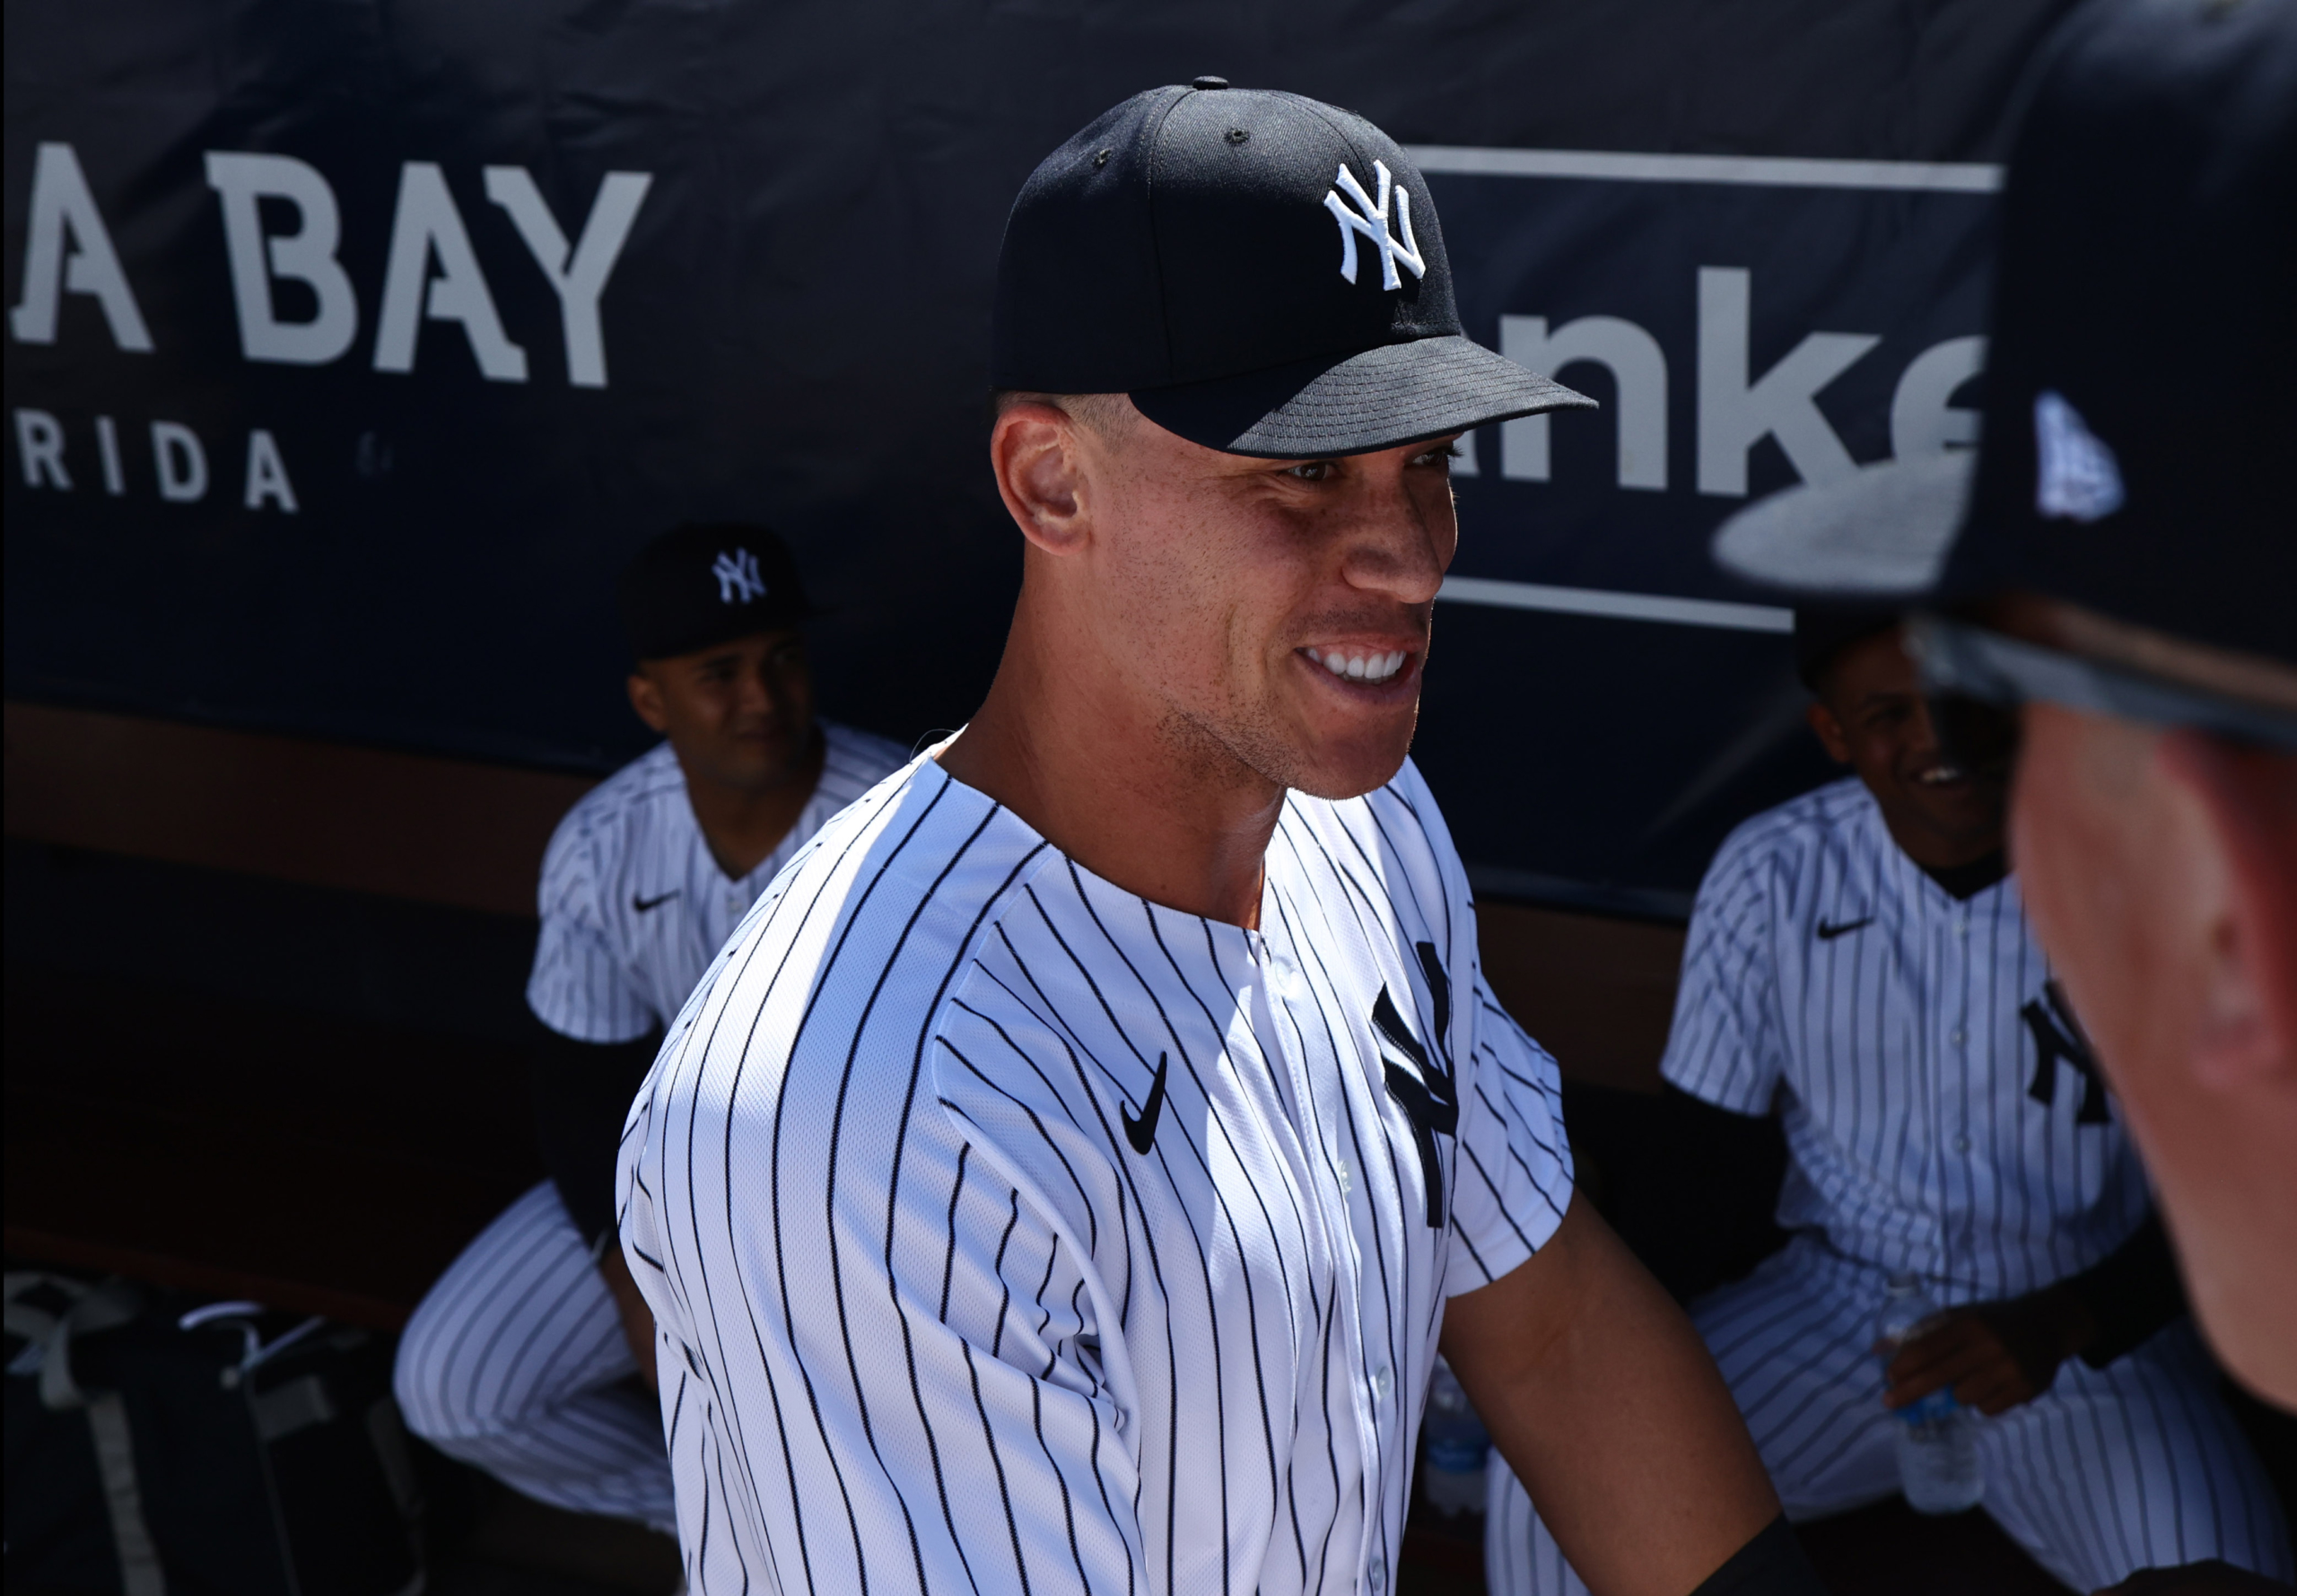 Aaron Judge gets last inexpensive payday from New York Yankees